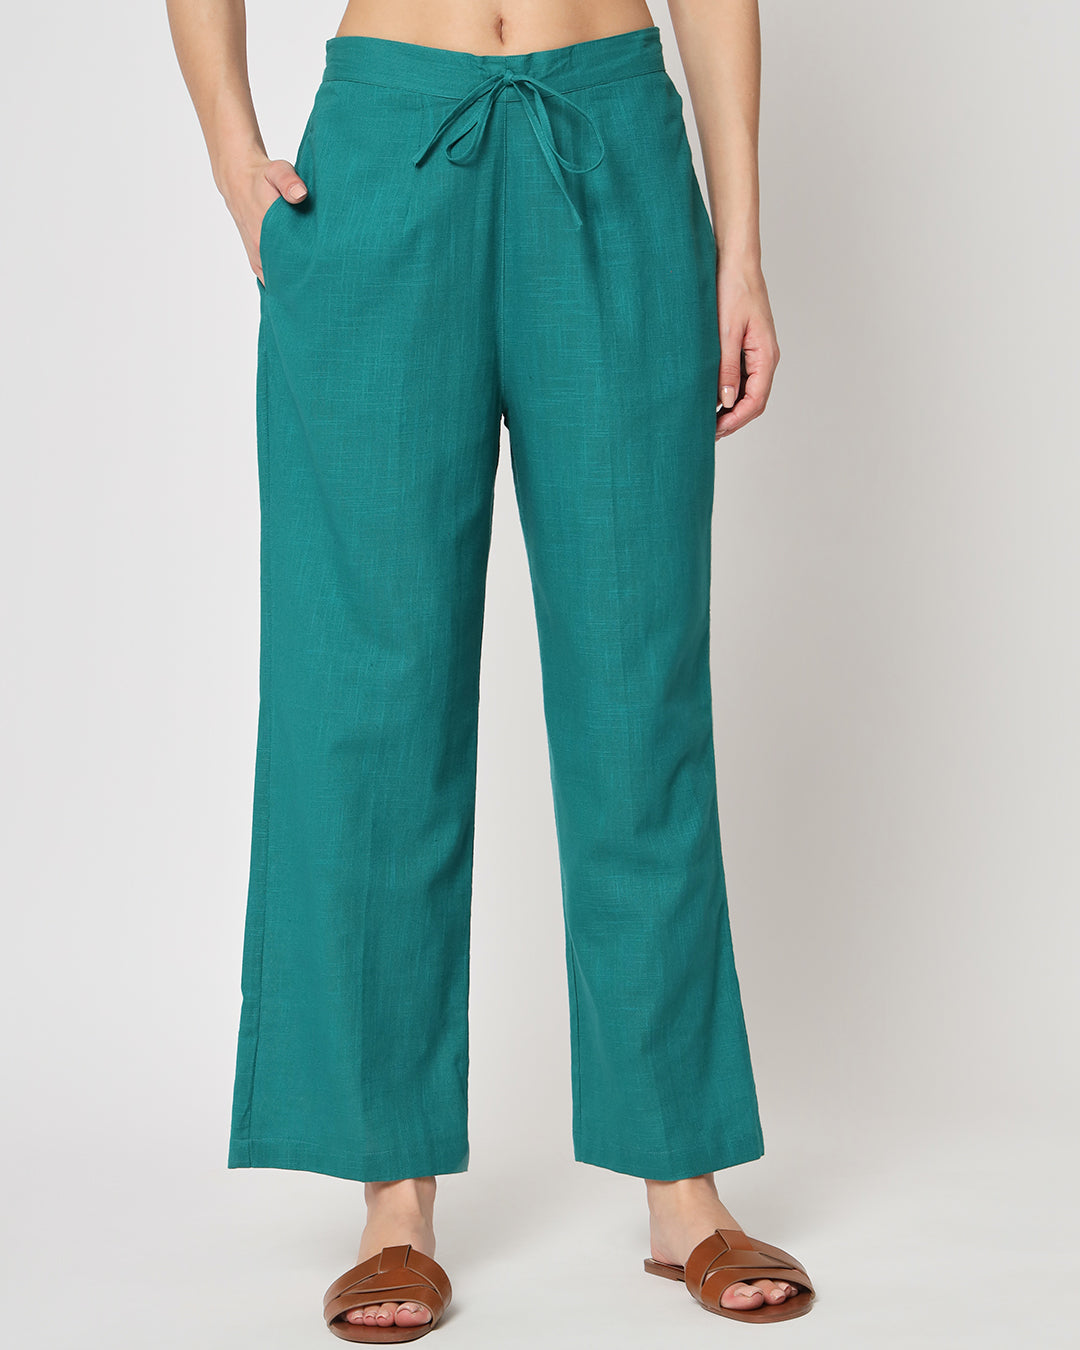 Combo: Greening Spring & Forest Green Straight Pants- Set of 2